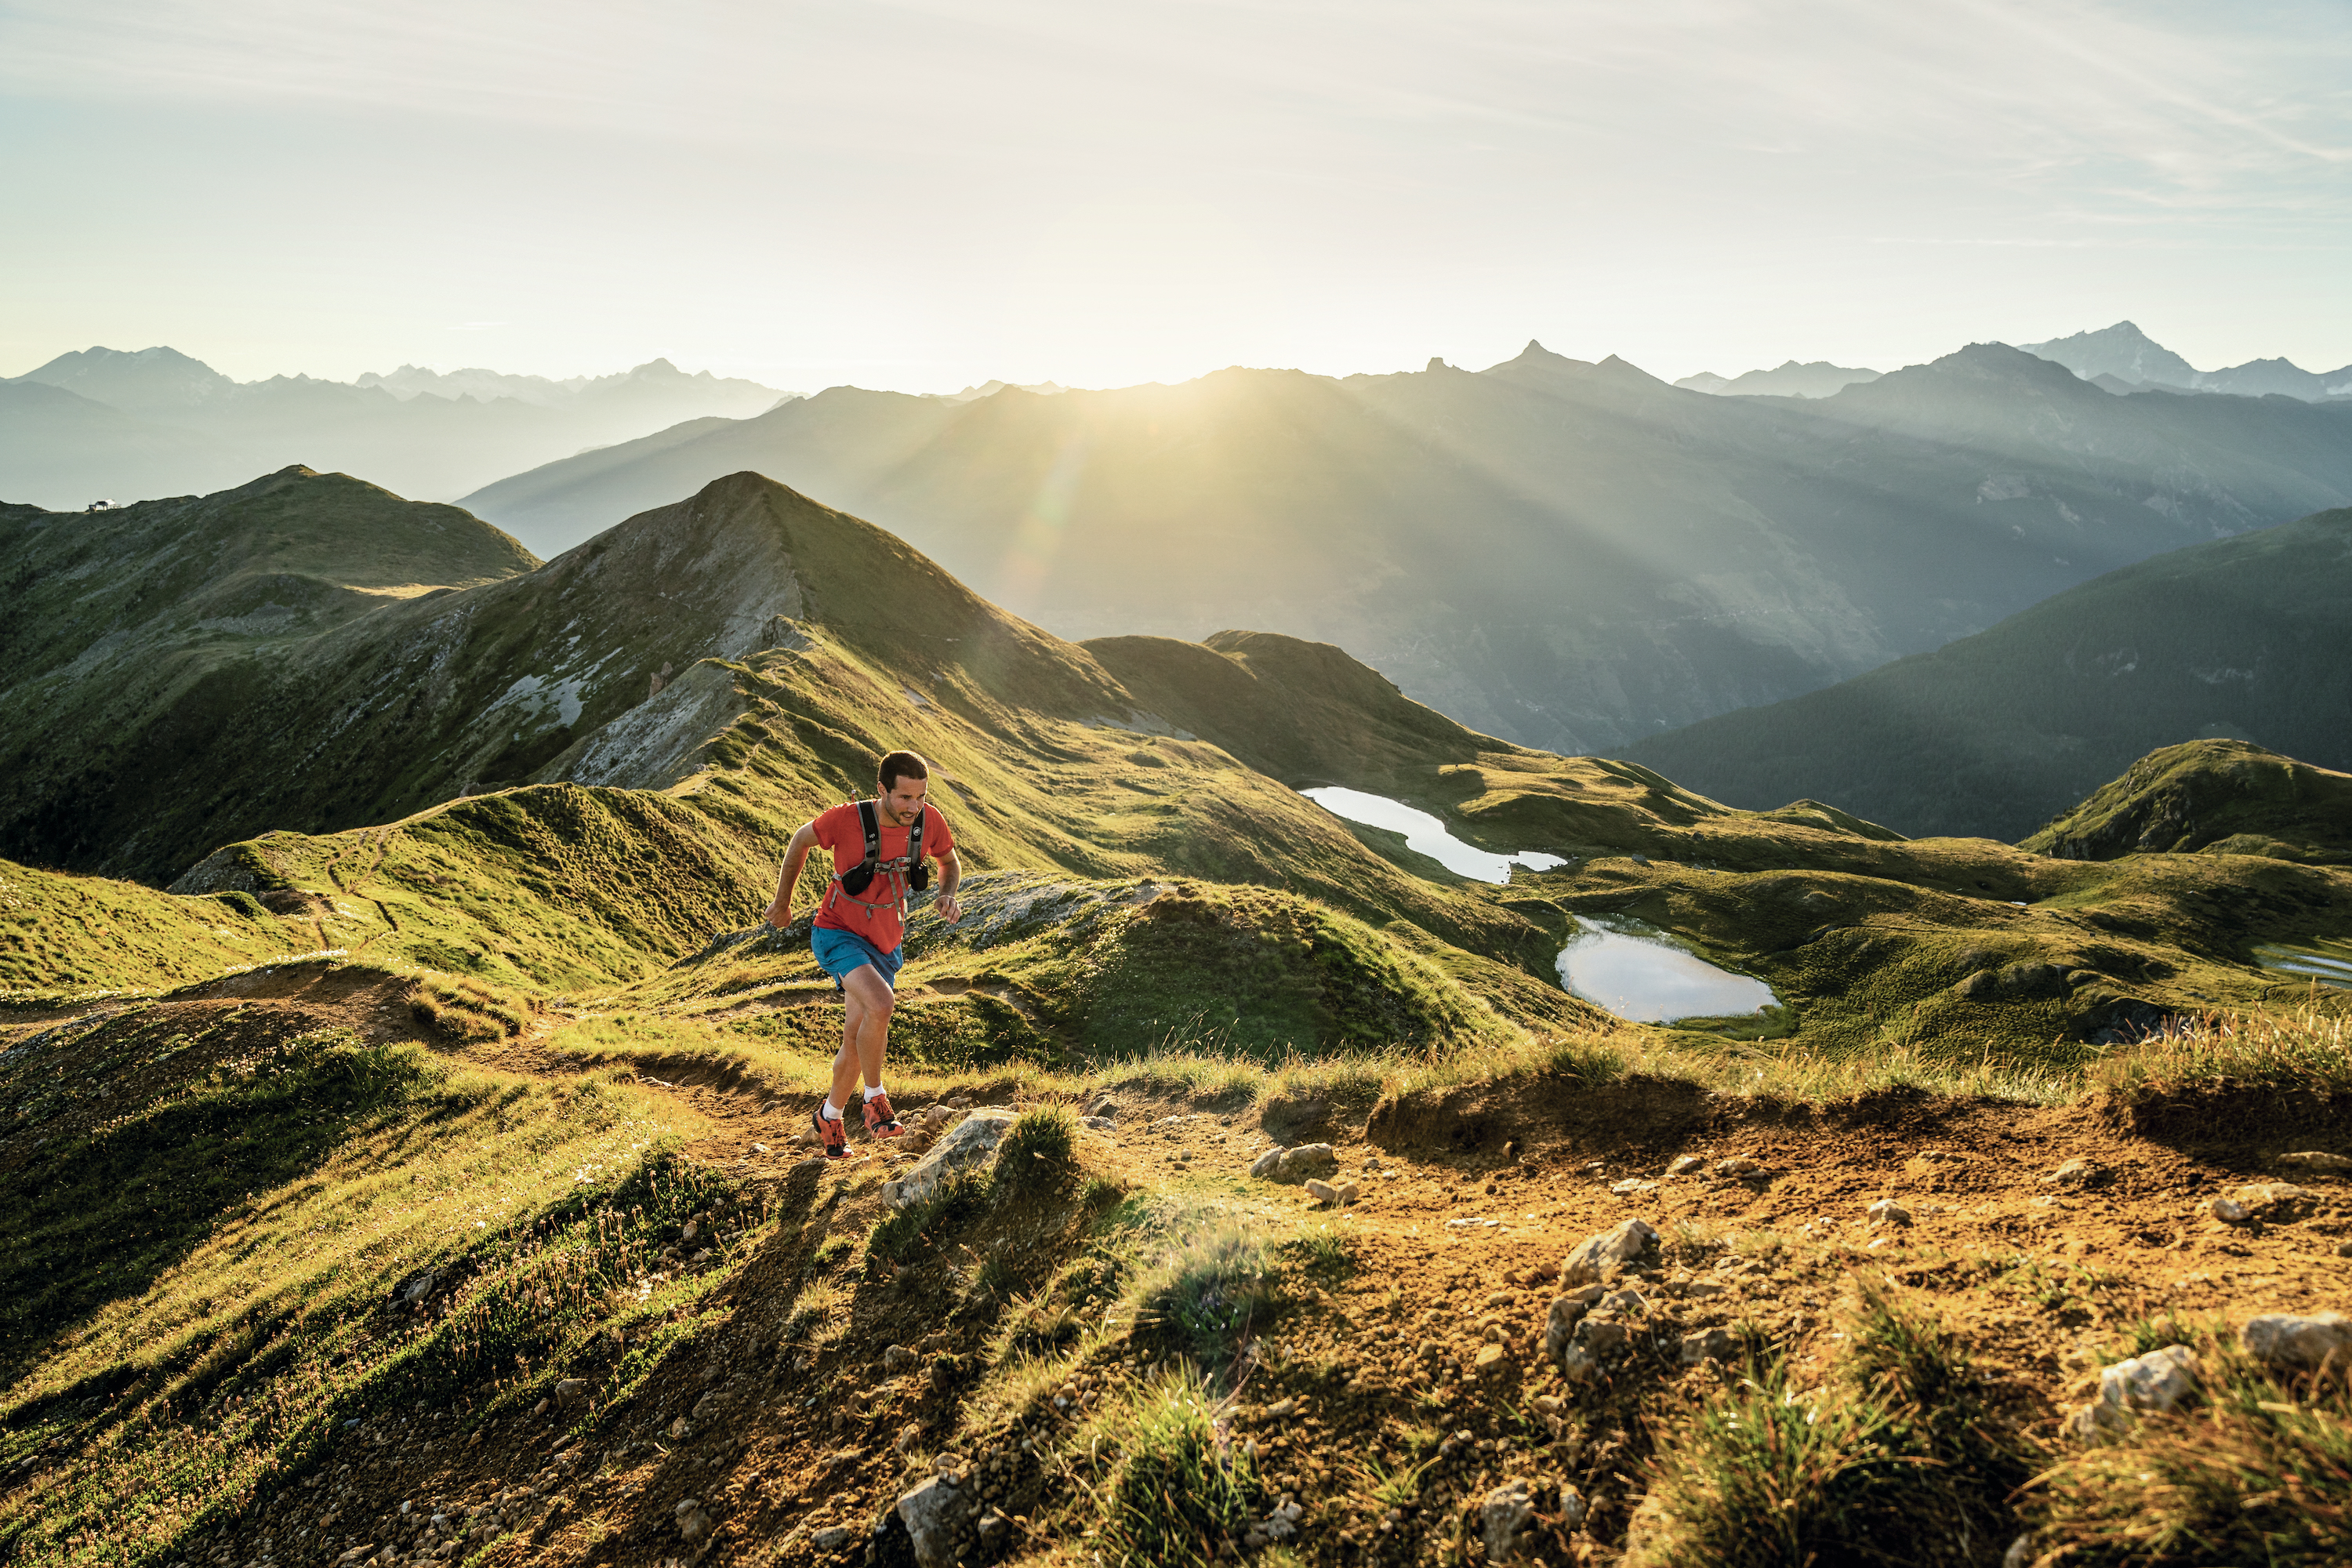 Scenic and stunning - unparalleled trail running in the Swiss Alps